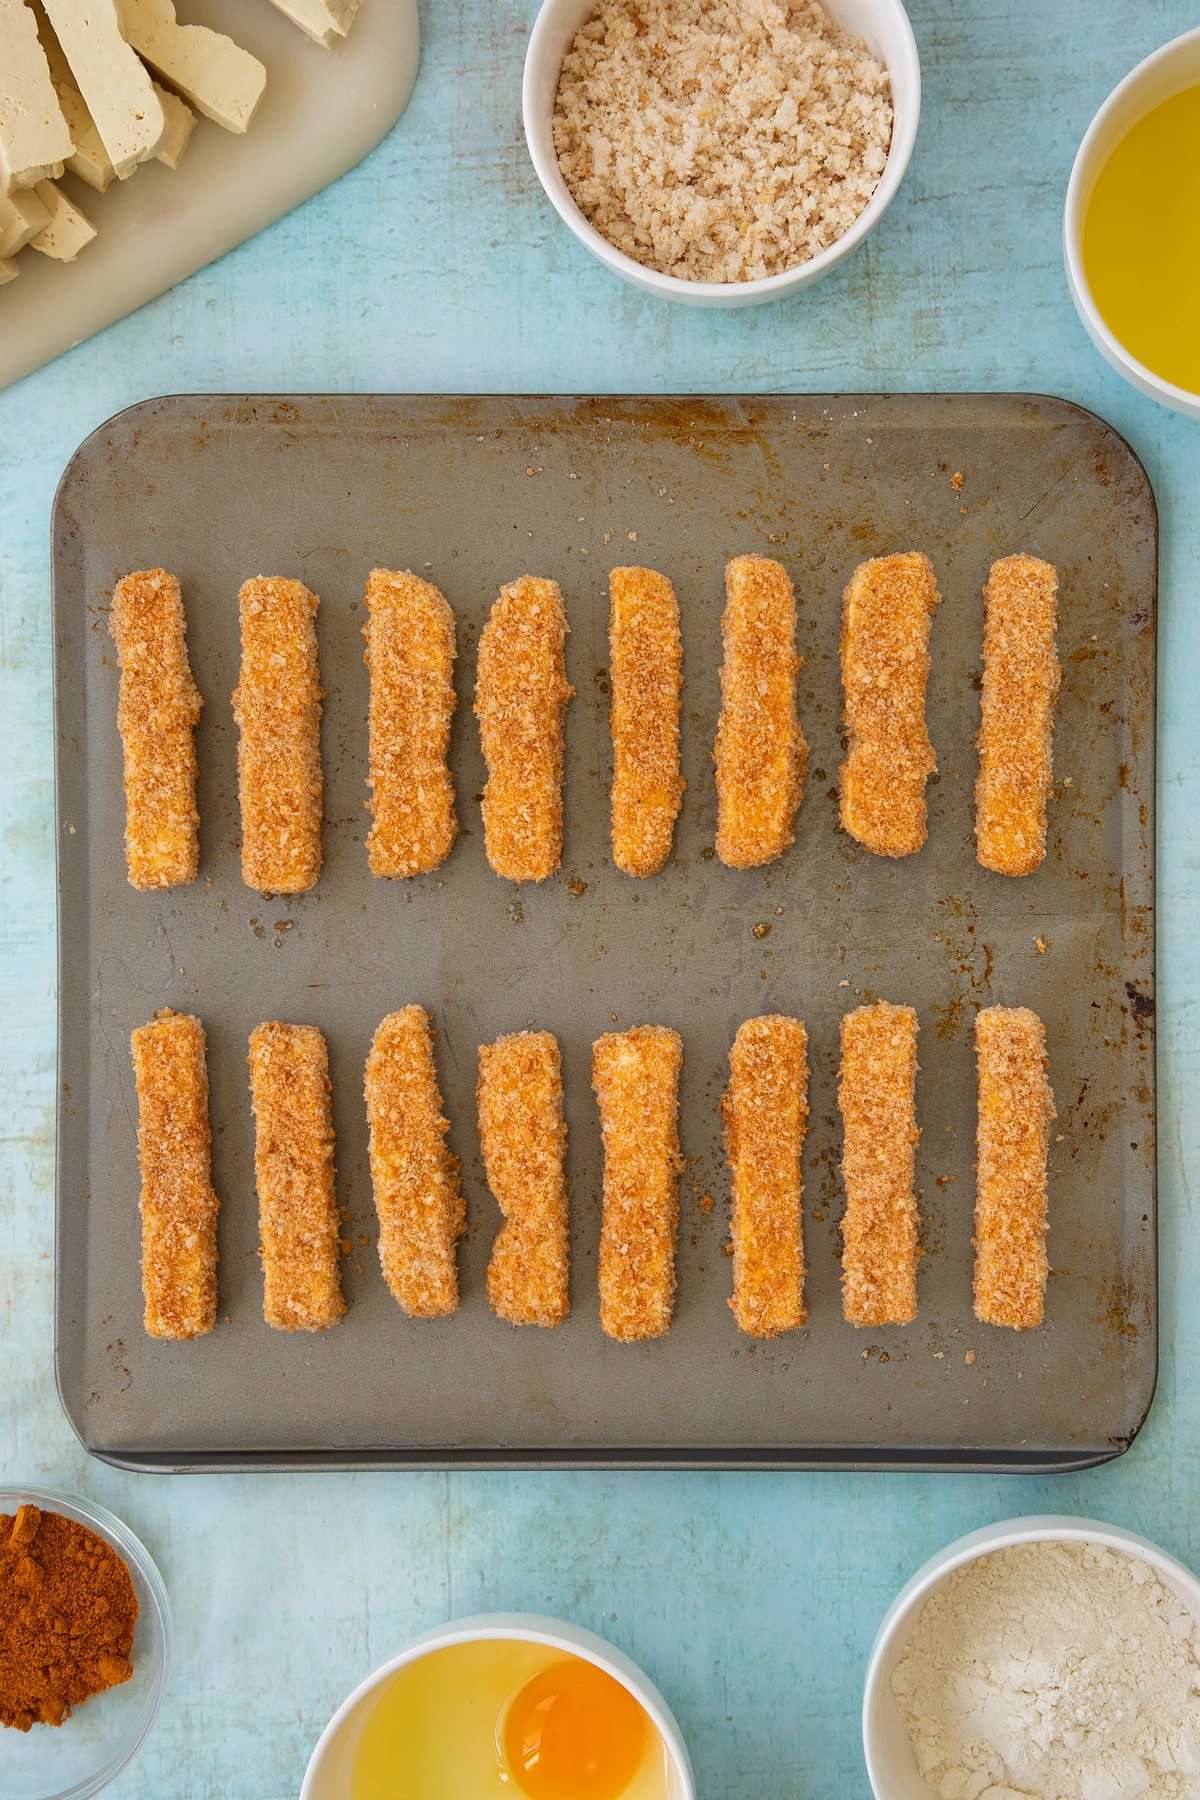 Uncooked, breadcrumb coated tofu fingers on a baking sheet. Ingredients to make tofu fingers surround the sheet.